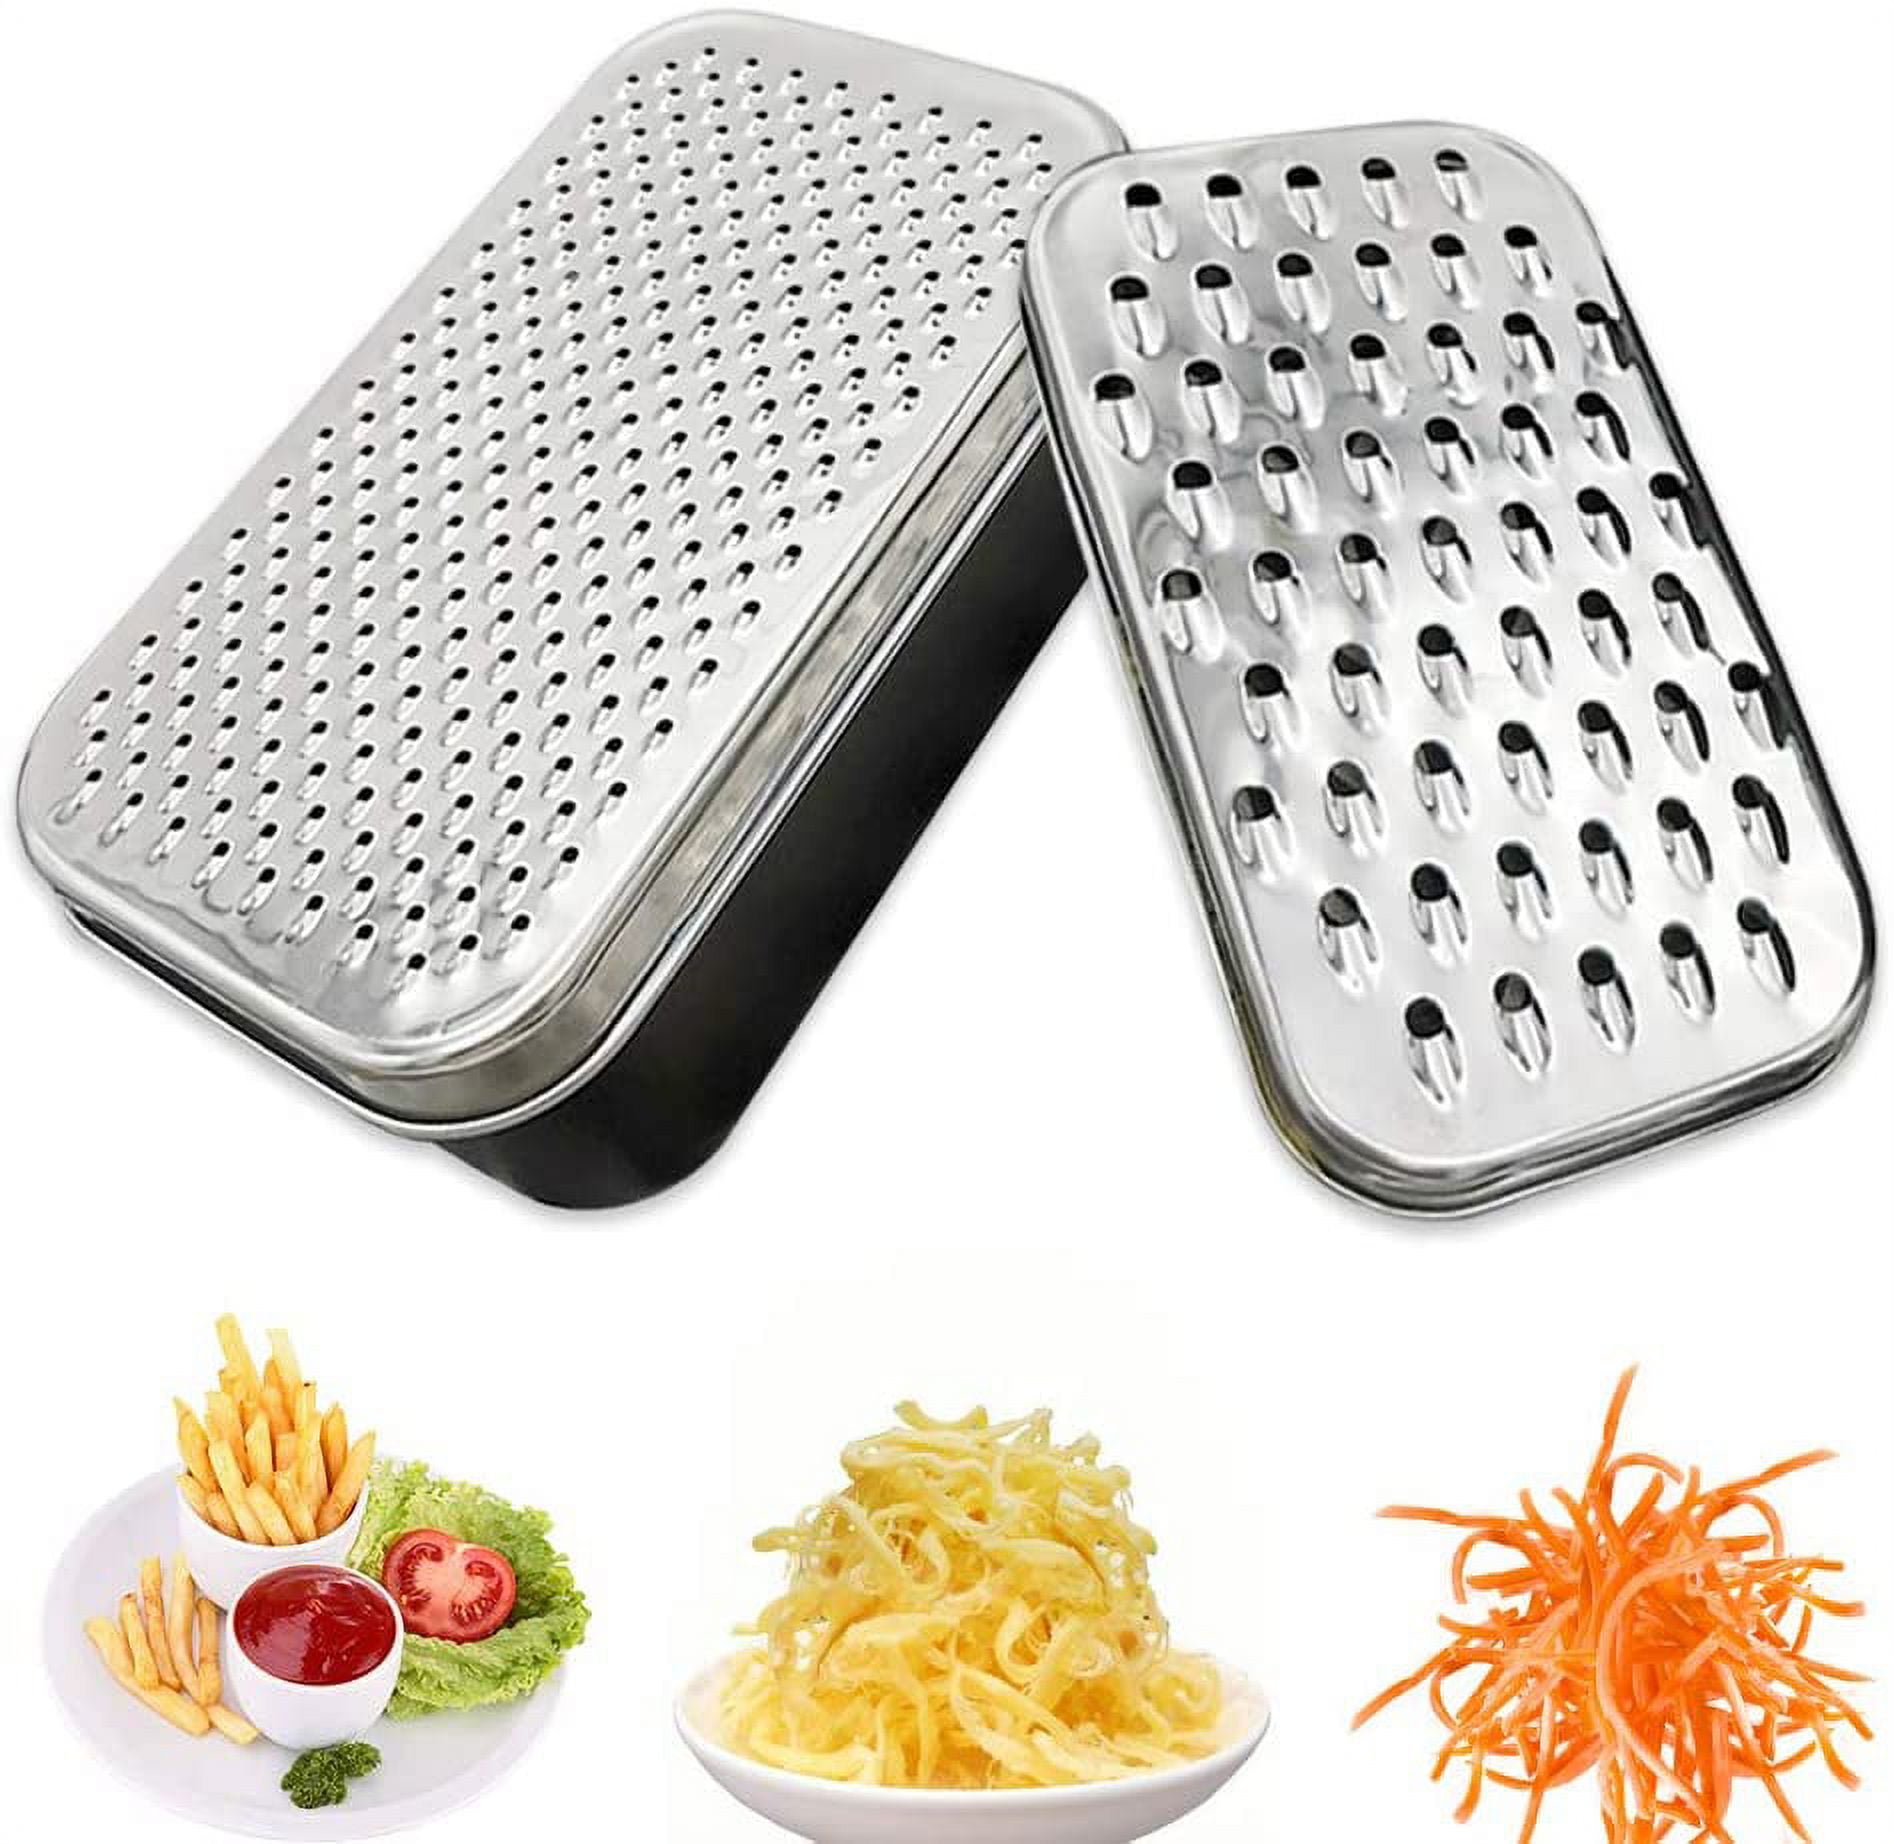 Commercial Vegetables, Fruits, Cheese Graters 🍏🥕🧀